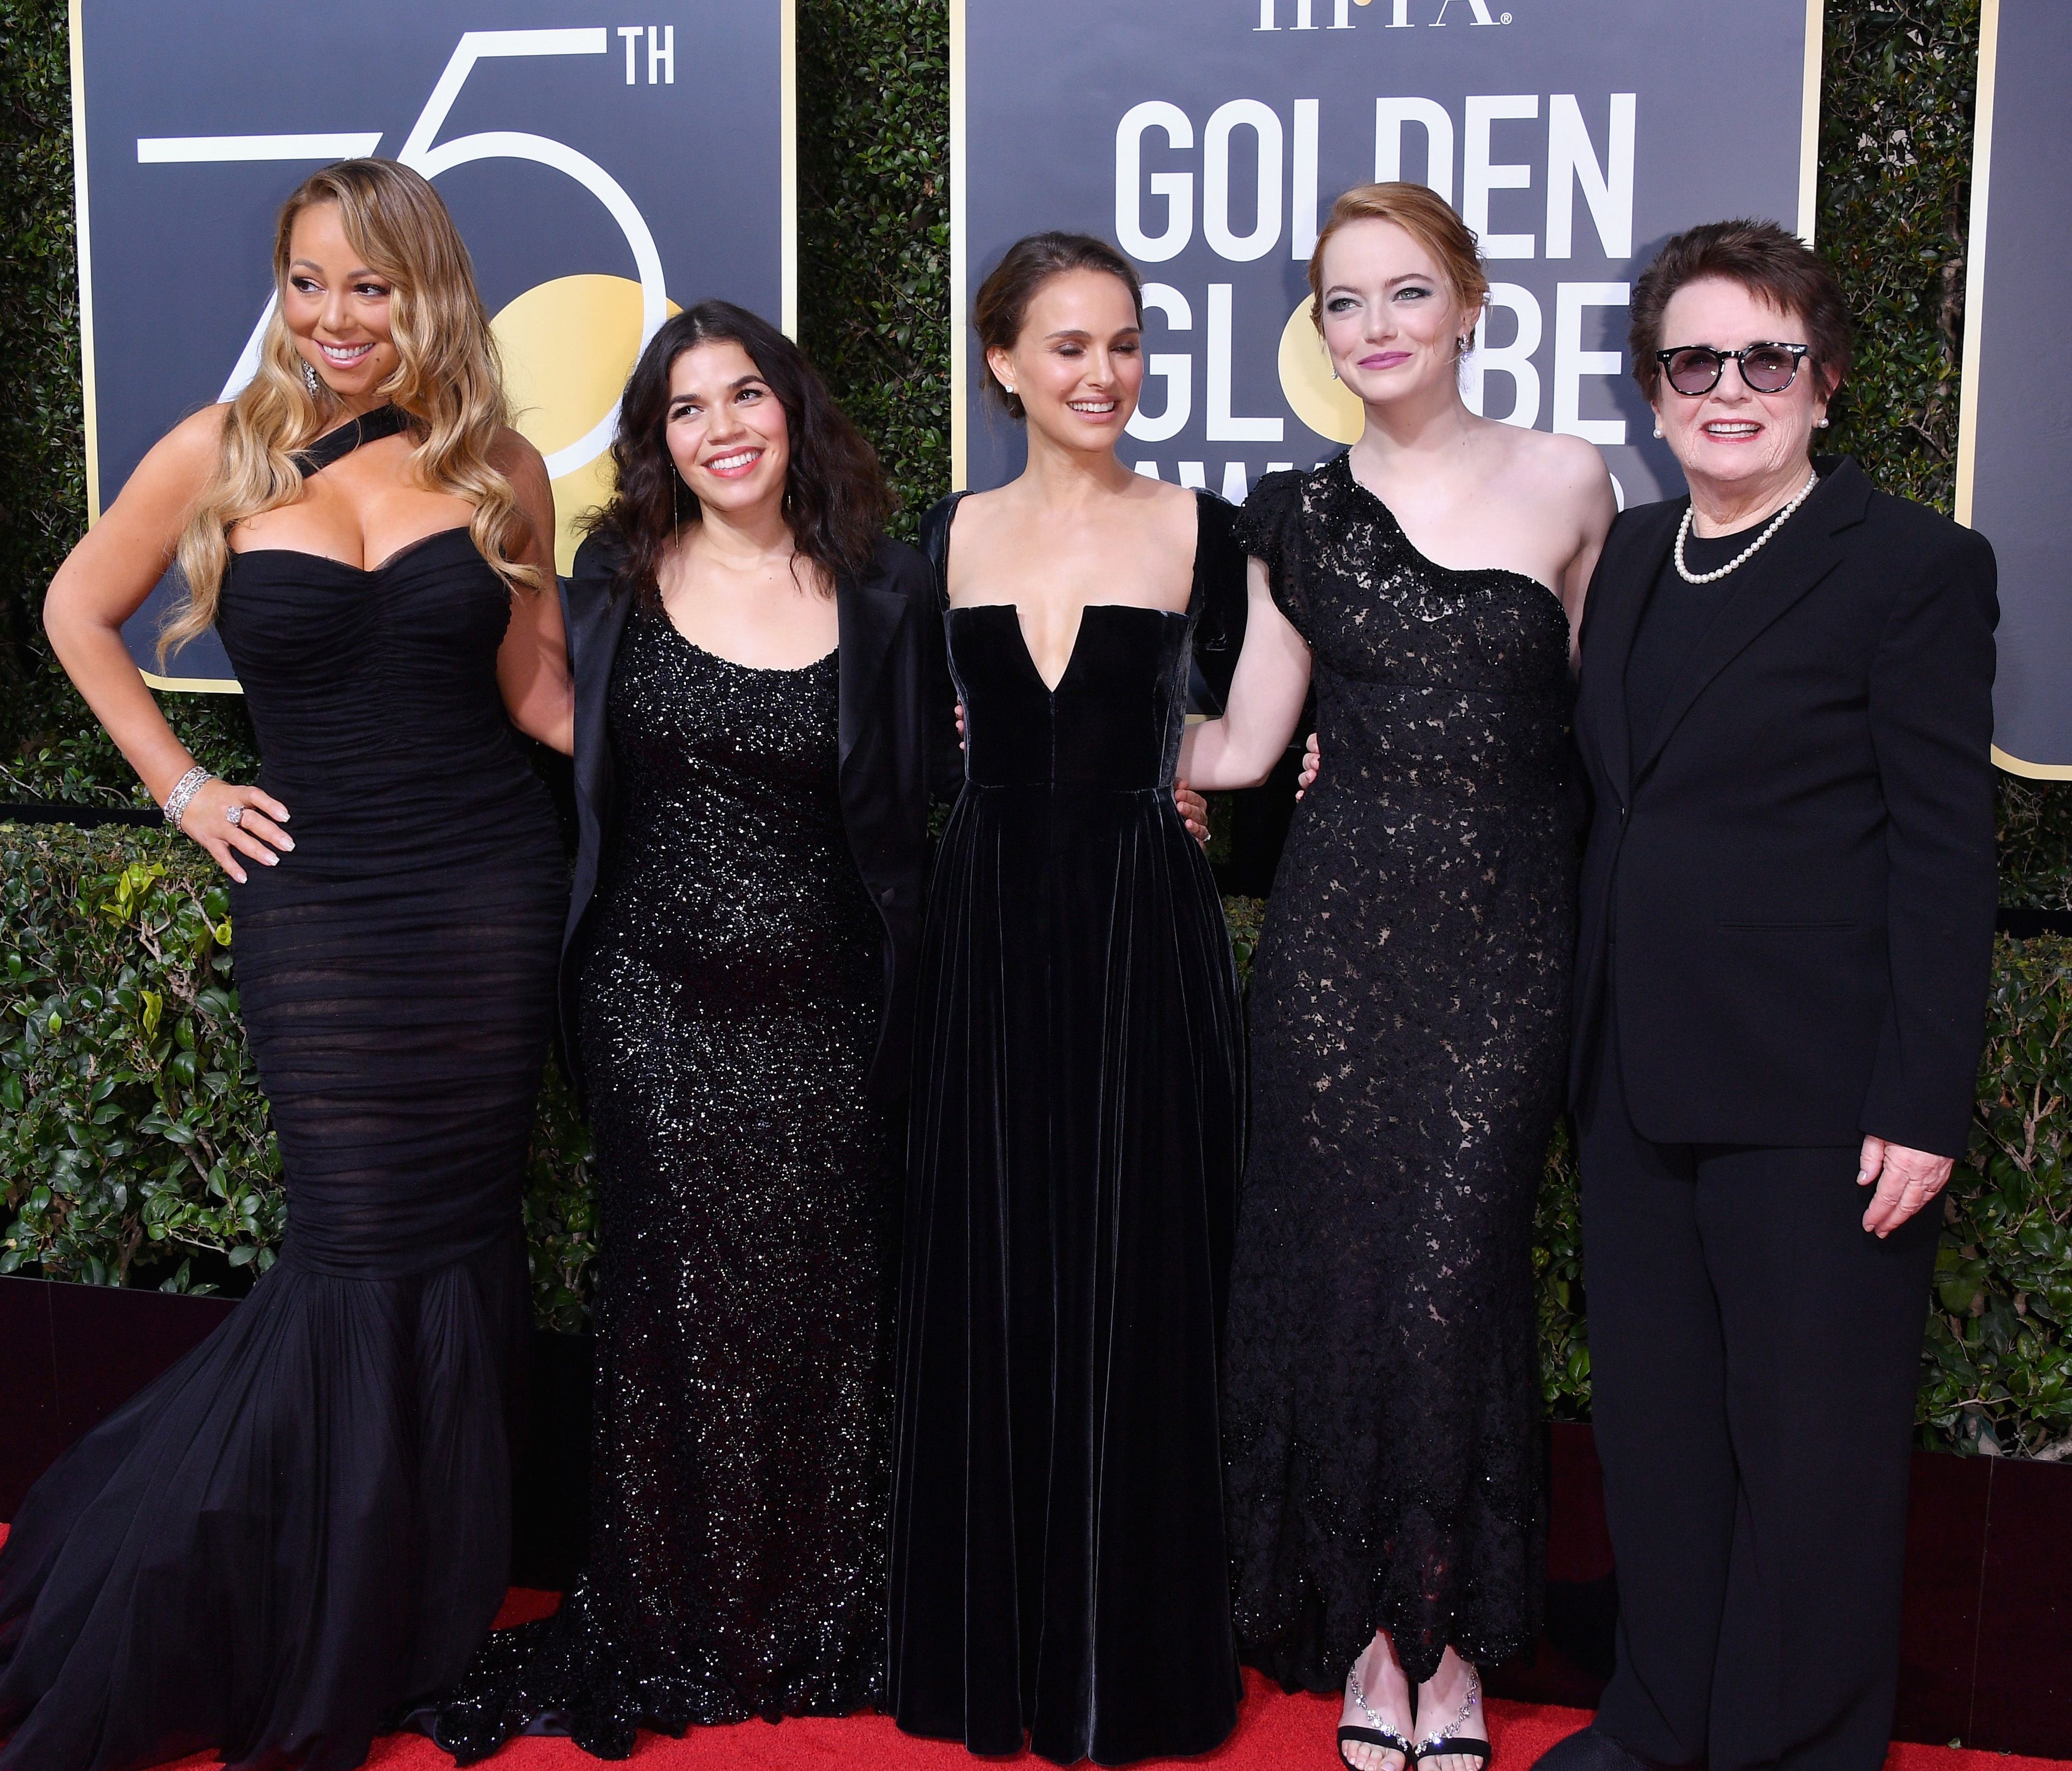 At the Golden Globes, stars like Mariah Carey, America Ferrera, Natalie Portman, Emma Stone and tennis great/women's advocate Billie Jean King wore black in support of Time's Up.